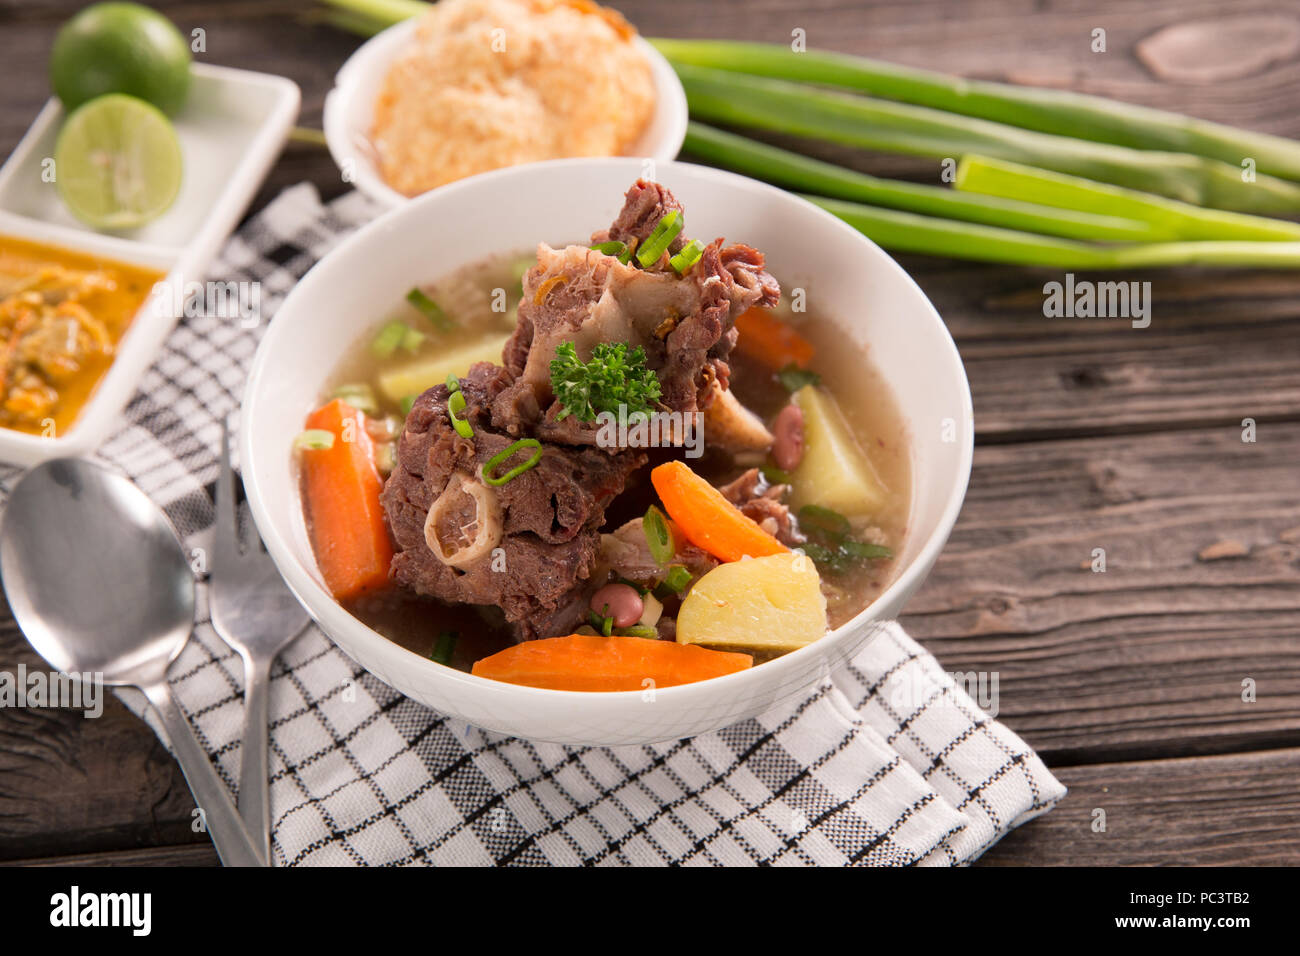 sop buntut or oxtail soup Stock Photo